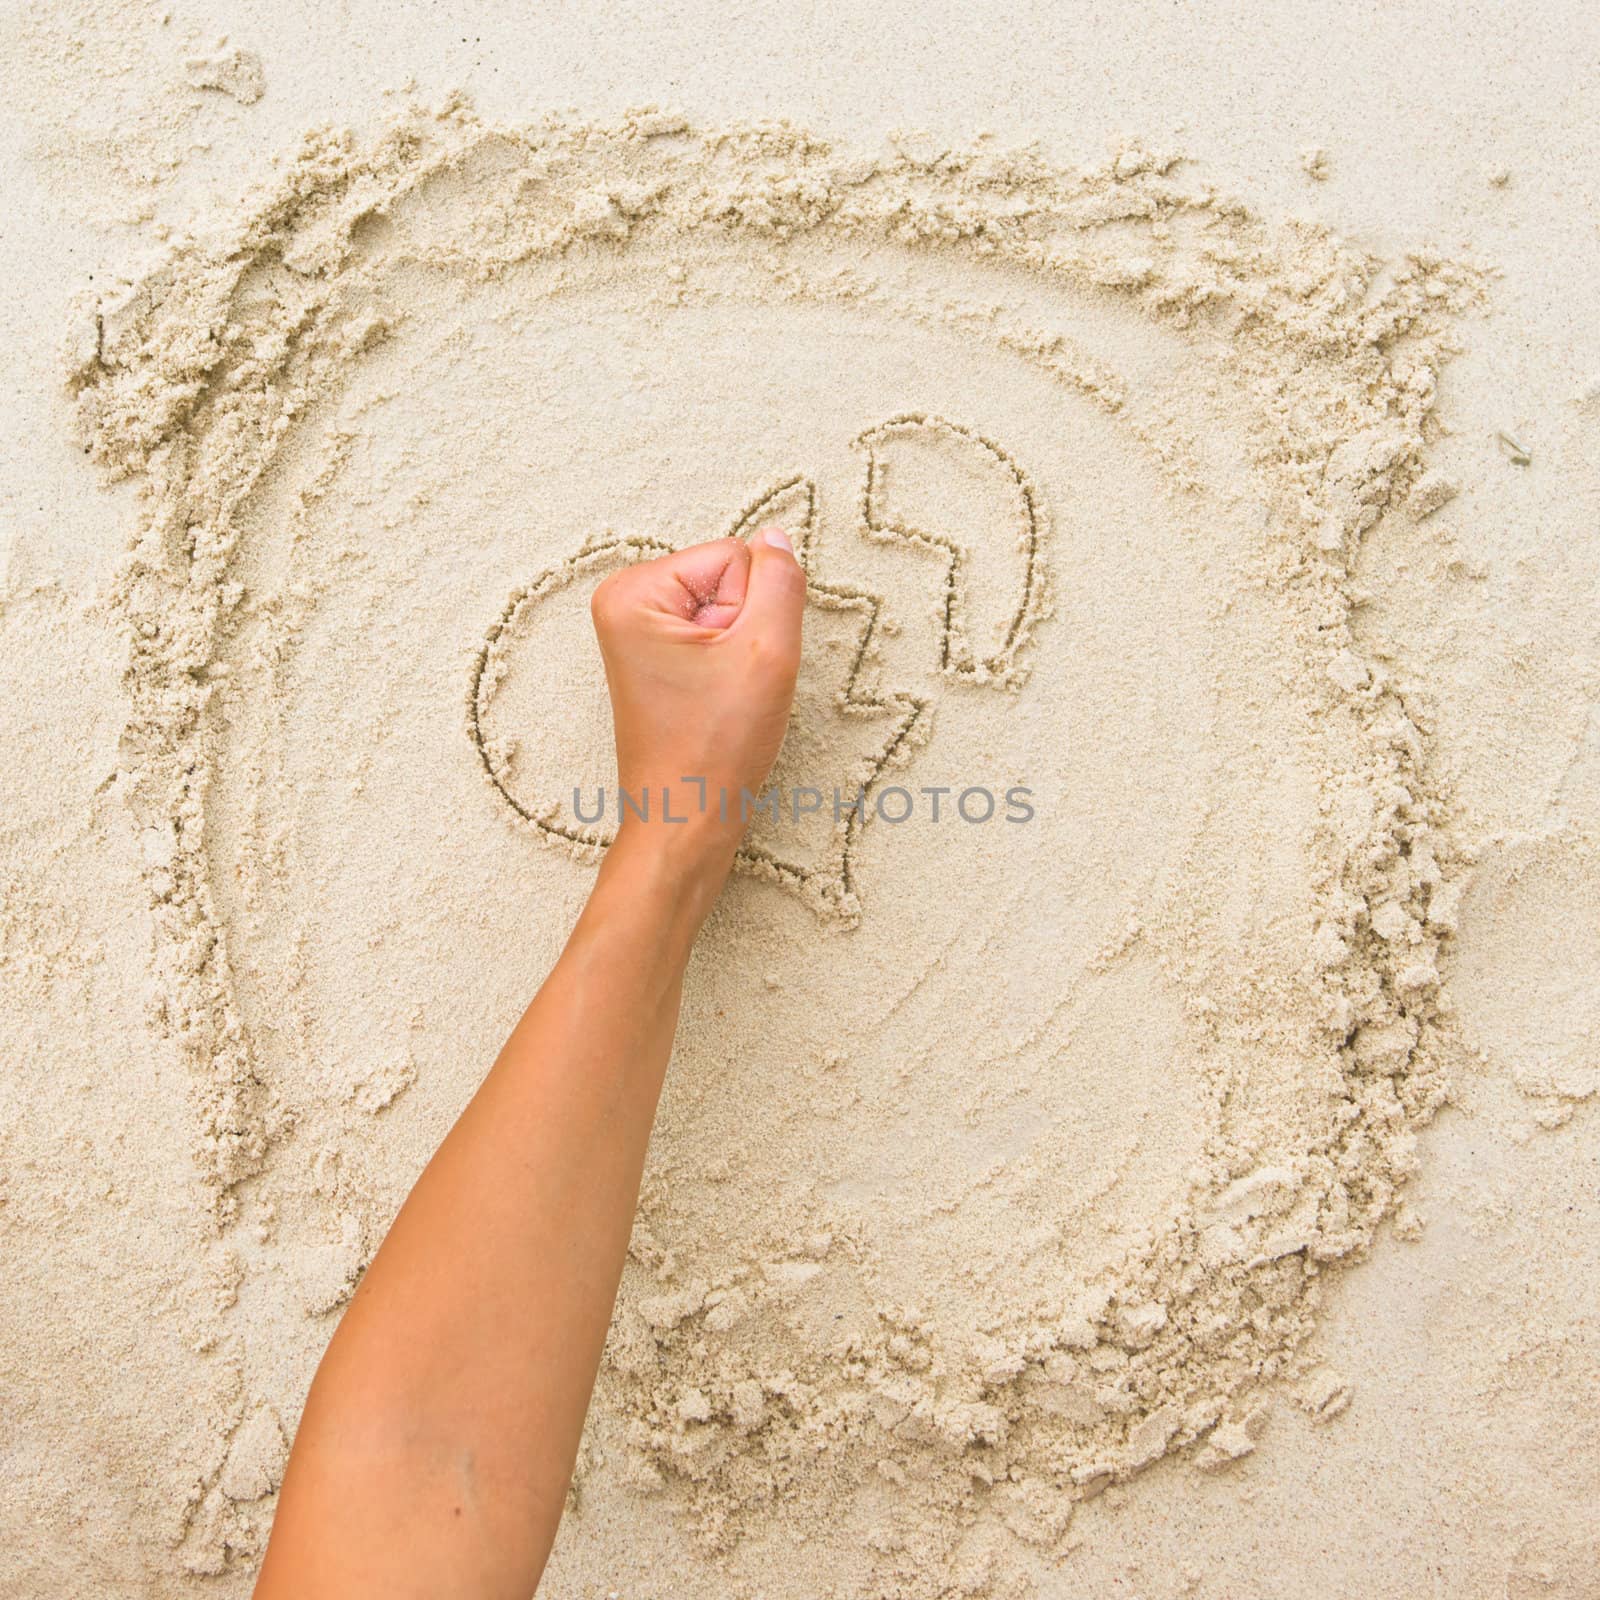 The fist breaking the sand heart